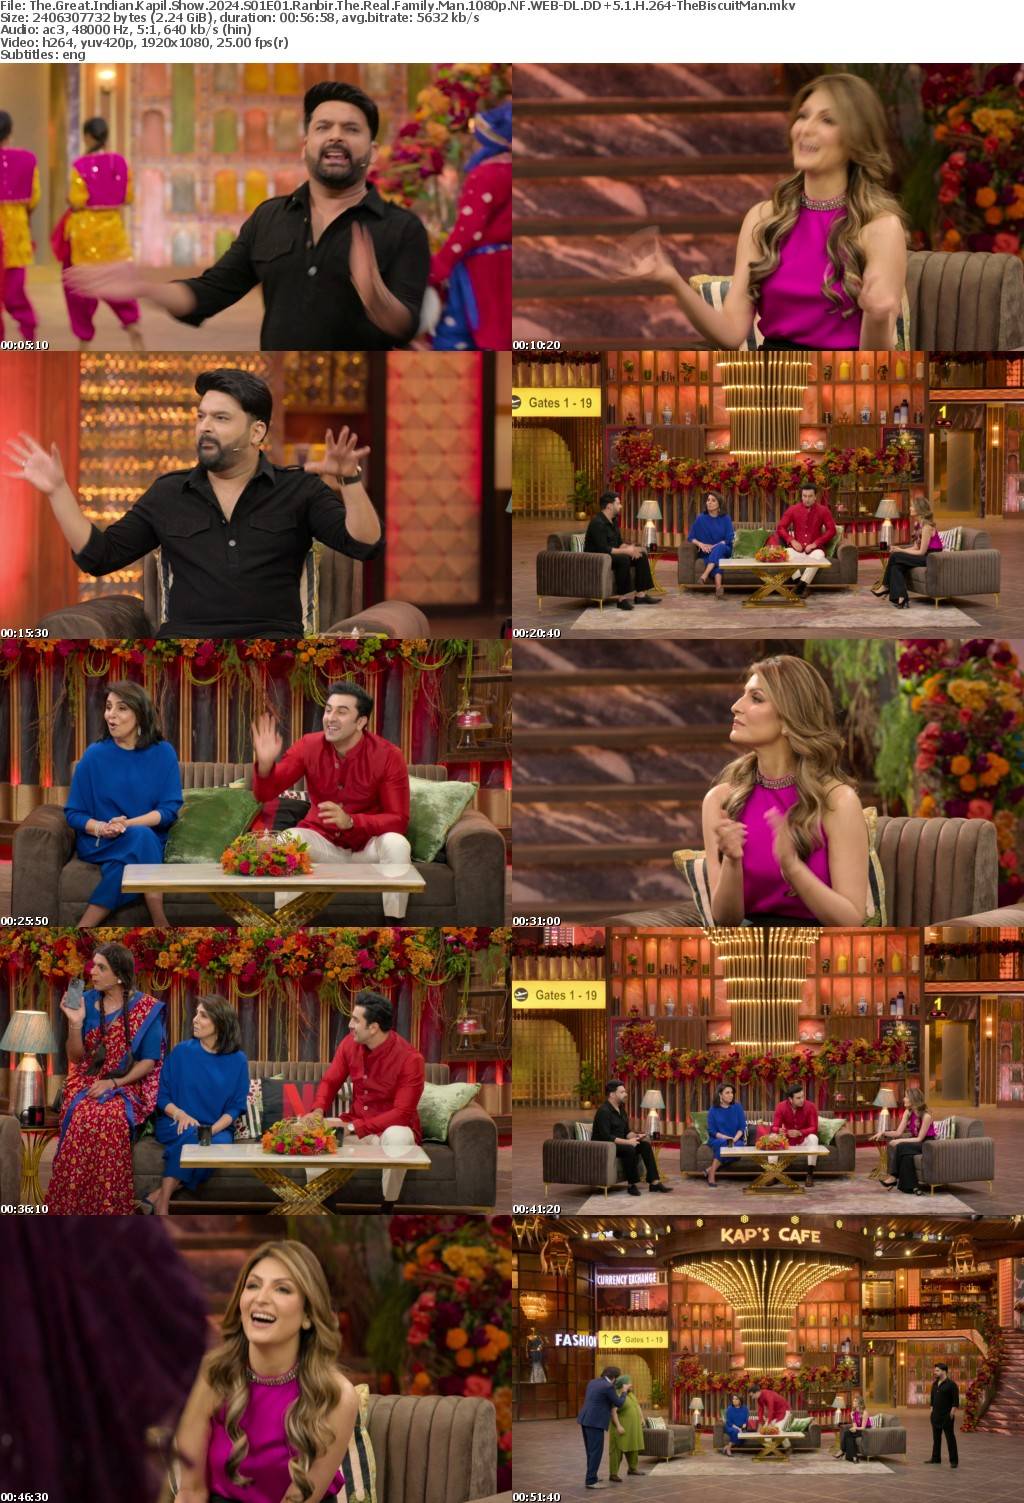 The Great Indian Kapil Show 2024 S01E01 Ranbir The Real Family Man 1080p NF WEB-DL DD+5 1 H 264-TheBiscuitMan